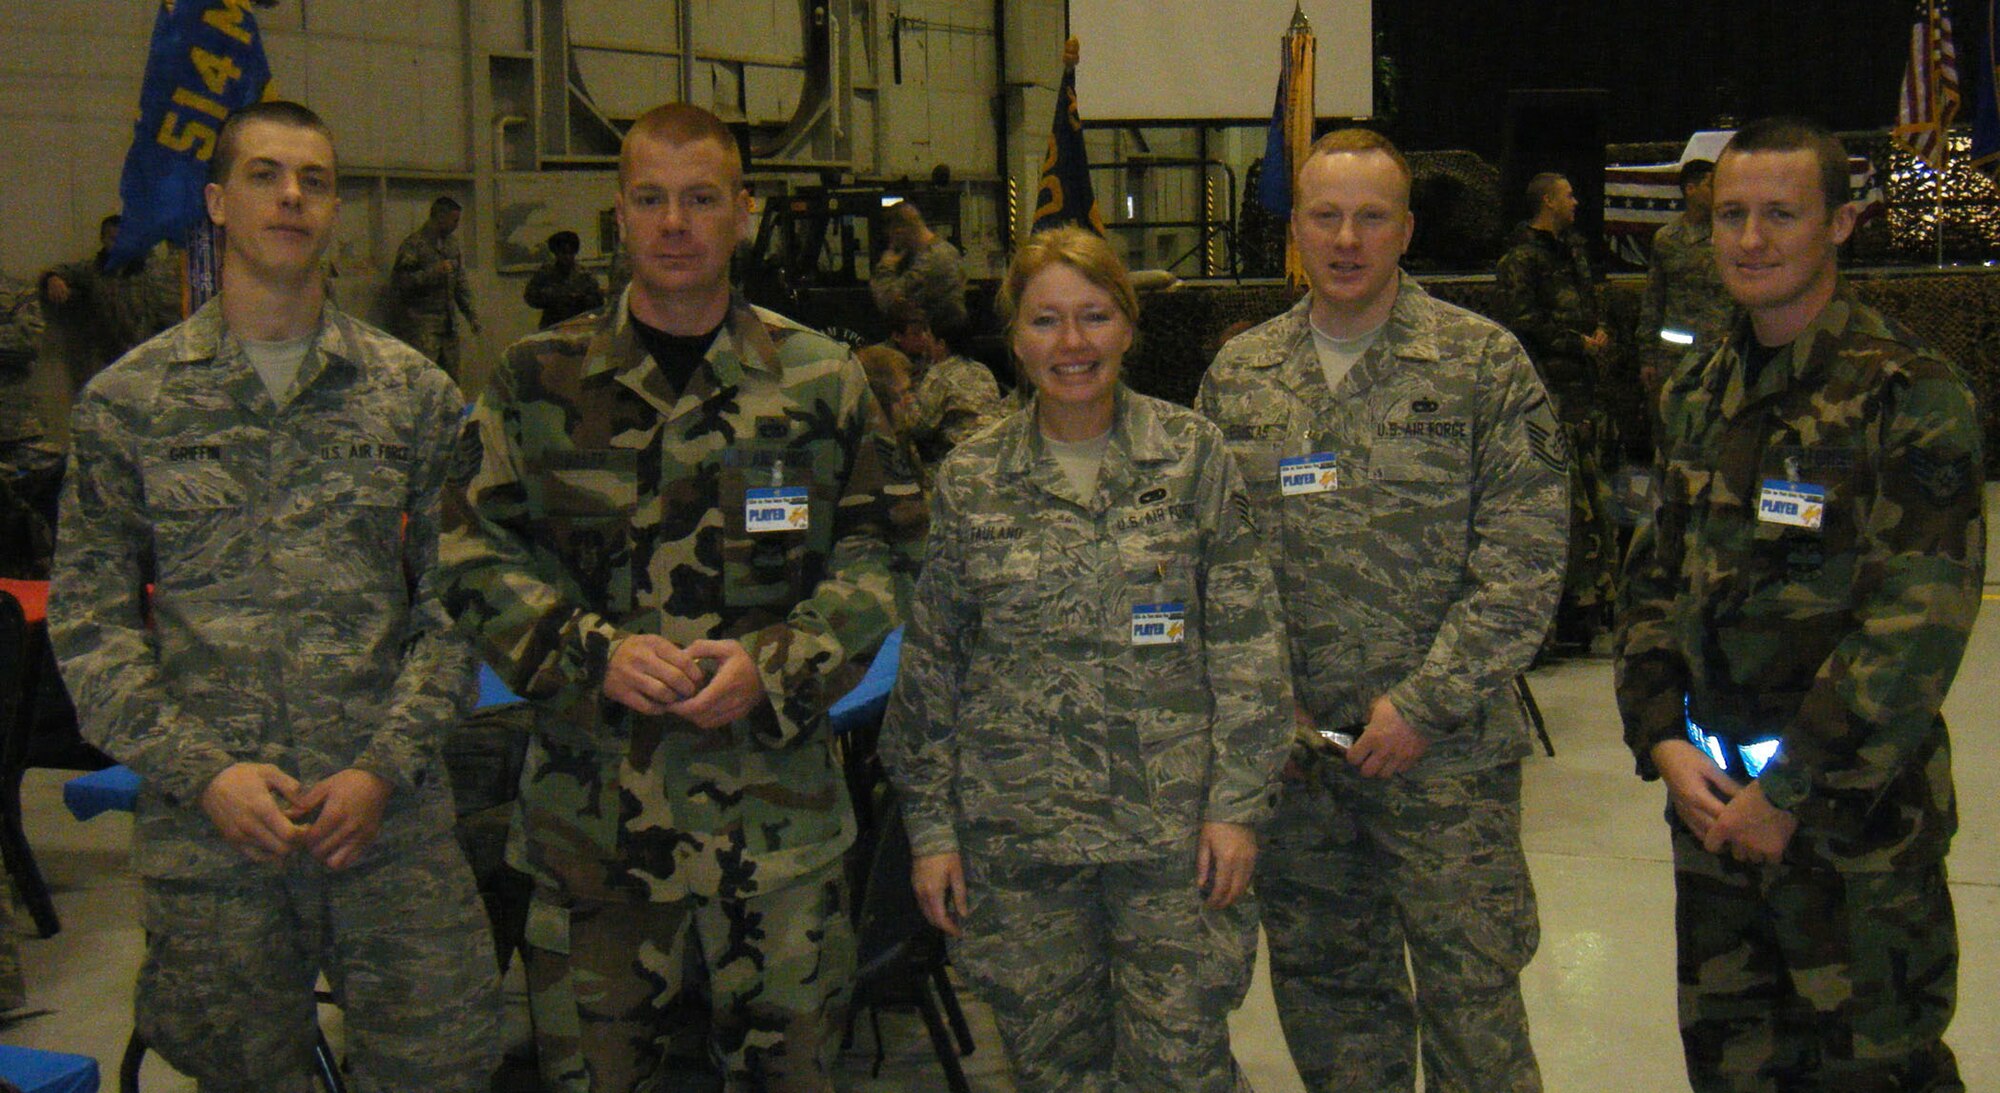 Members of the 39th Aerial Port Squadron pose after taking the honors of two categories during the 2009 22nd Air Force Aerial Port Roundup at Dobbins Air Reserve Base, Ga. The March 13-15 event lead the 39th APS team to place first in the Aerial Port Trivia category and team member Staff Sgt. Ryan Spawr placing first in the running portion of the Fit-2-Fight competition. (U.S. Air Force photo)